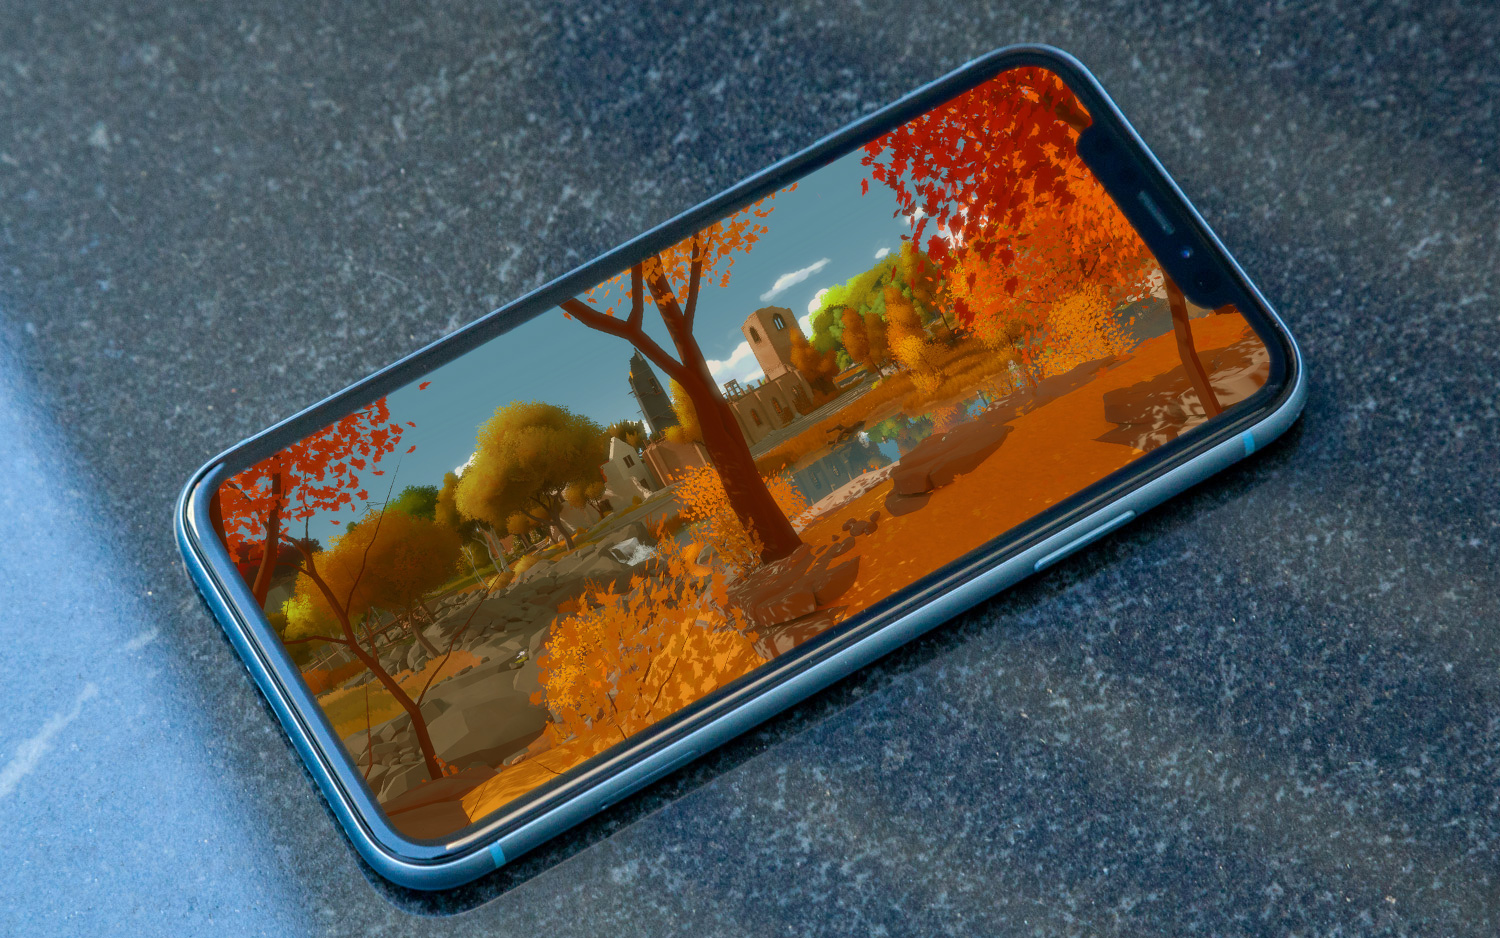 The 15 Best Games for the iPhone XS and iPhone XR | Tom's Guide